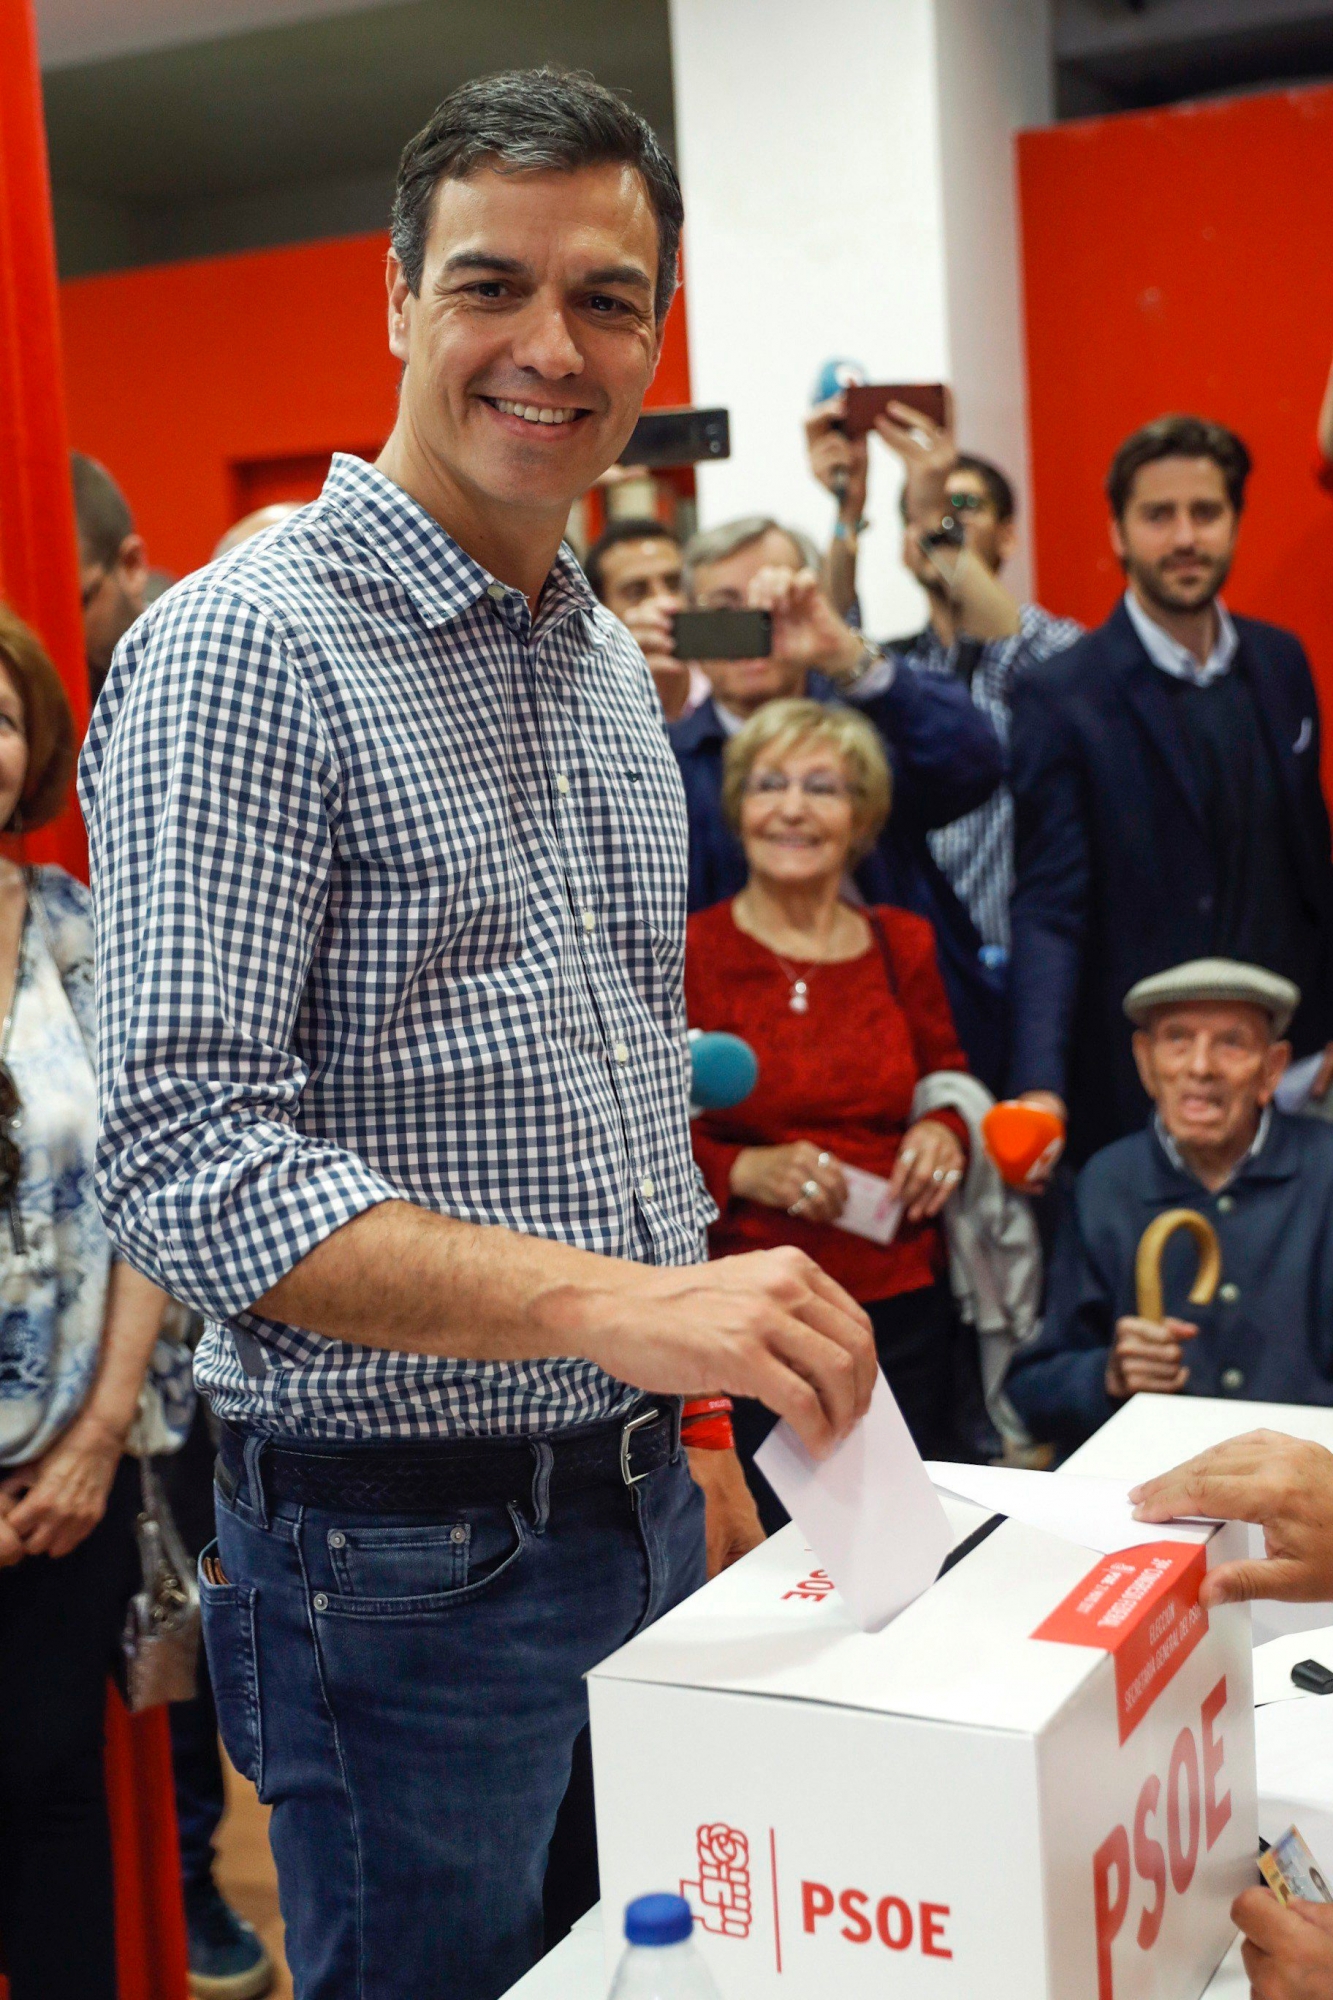 epa05978427 Candidate for the socialist party PSOE primary elections Pedro Sanchez casts his vote at a poll station of Pozuelo de Alarcon, Madrid Spain, 21 May 2017. The 187,000 members of the main opposition party of Spain are voting to choose their new leader.  EPA/EMILIO NARANJO SPAIN PARTIES PSOE LEADERSHIP VOTE